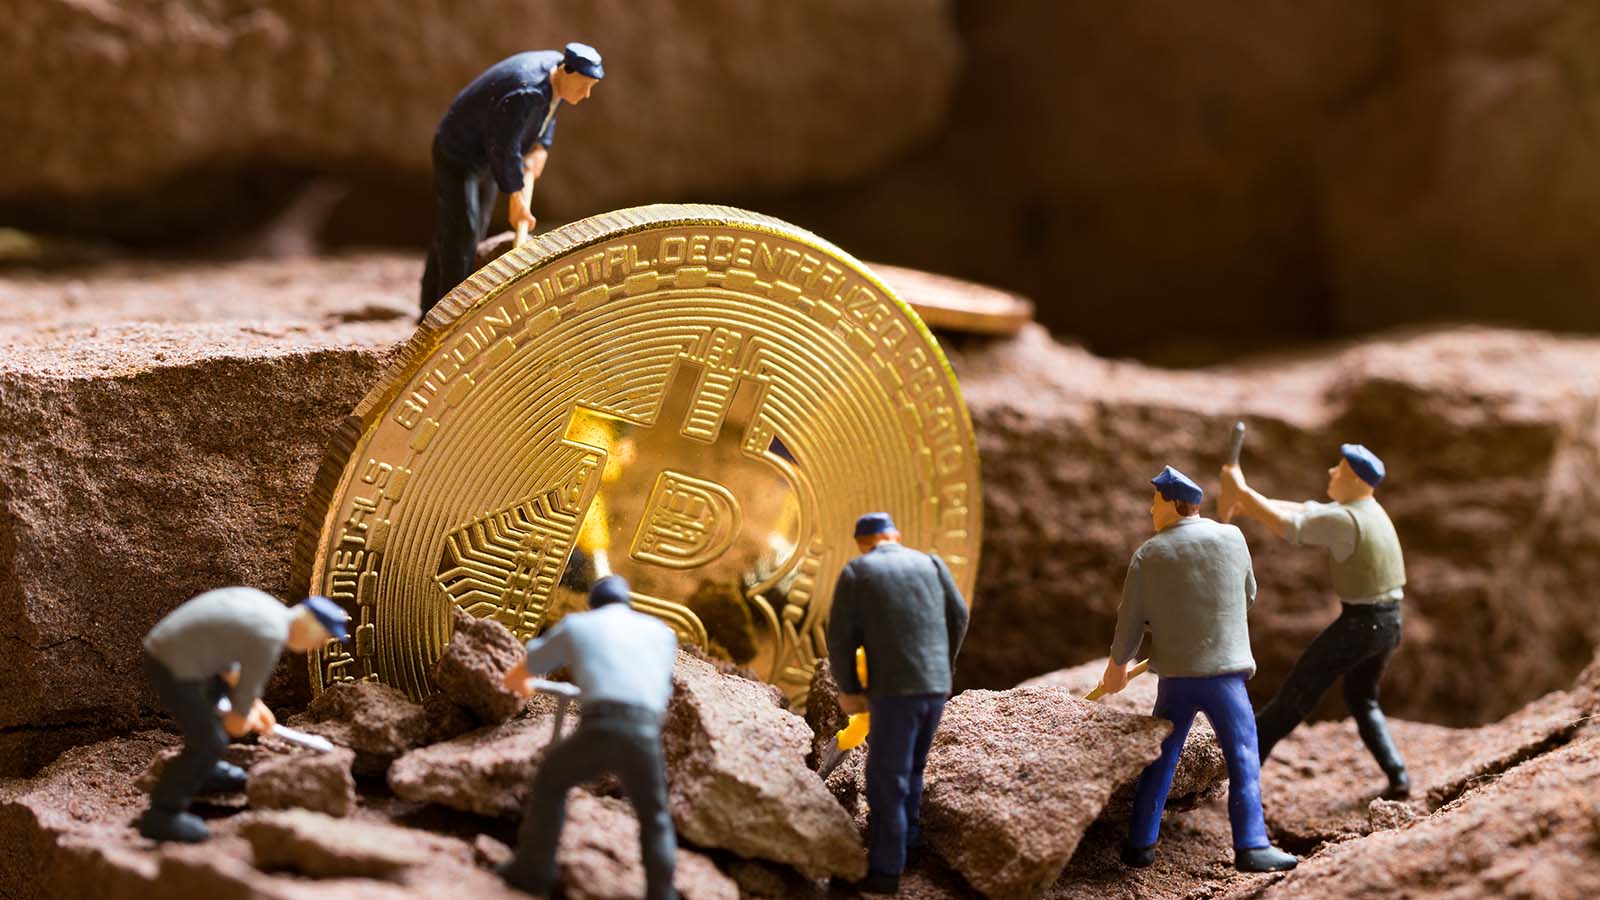 New Yorks Push To Outlaw Crypto Mining Has Sparked A Backlash From The Public